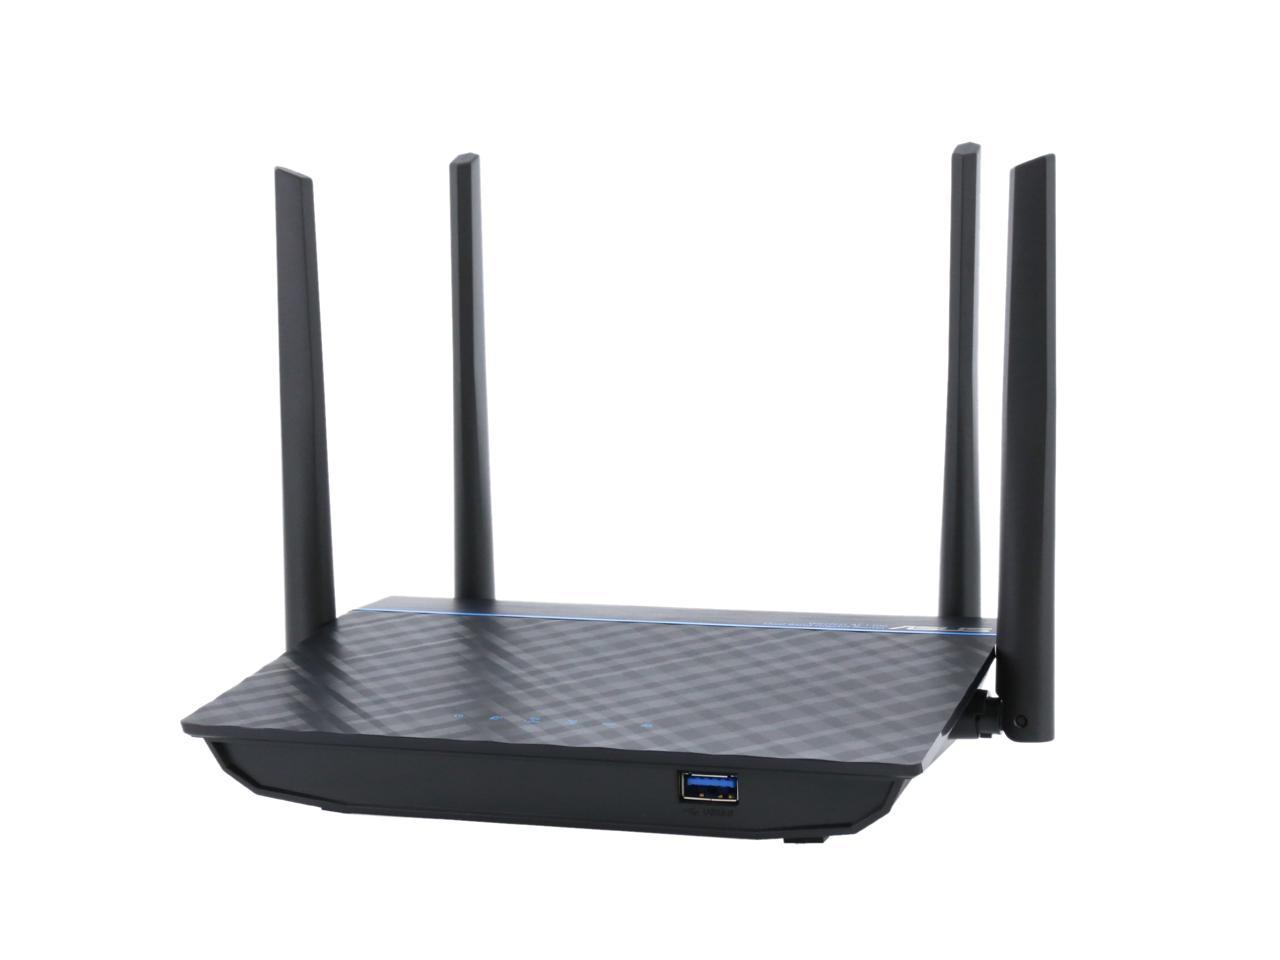 ASUS RT-ACRH13 Dual-Band 2x2 AC1300 Wifi 4-port Gigabit Router with USB 3.0 